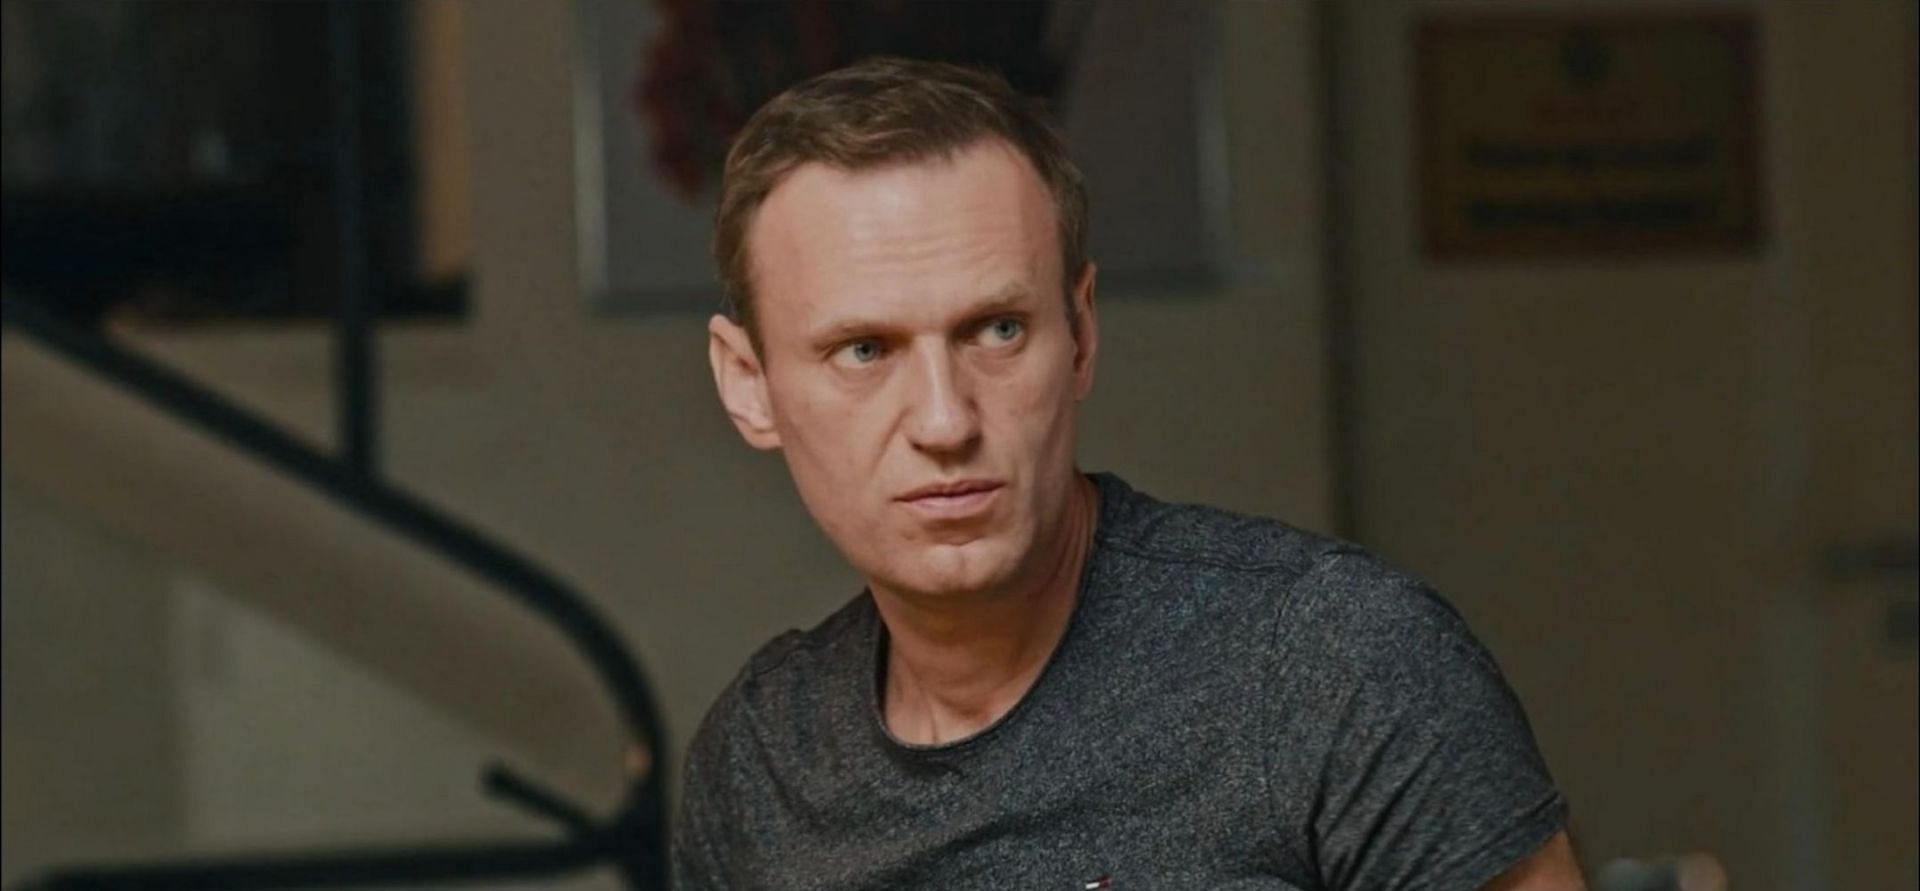 Where to watch the Navalny documentary? All streaming options explored (Image via HBO Max)